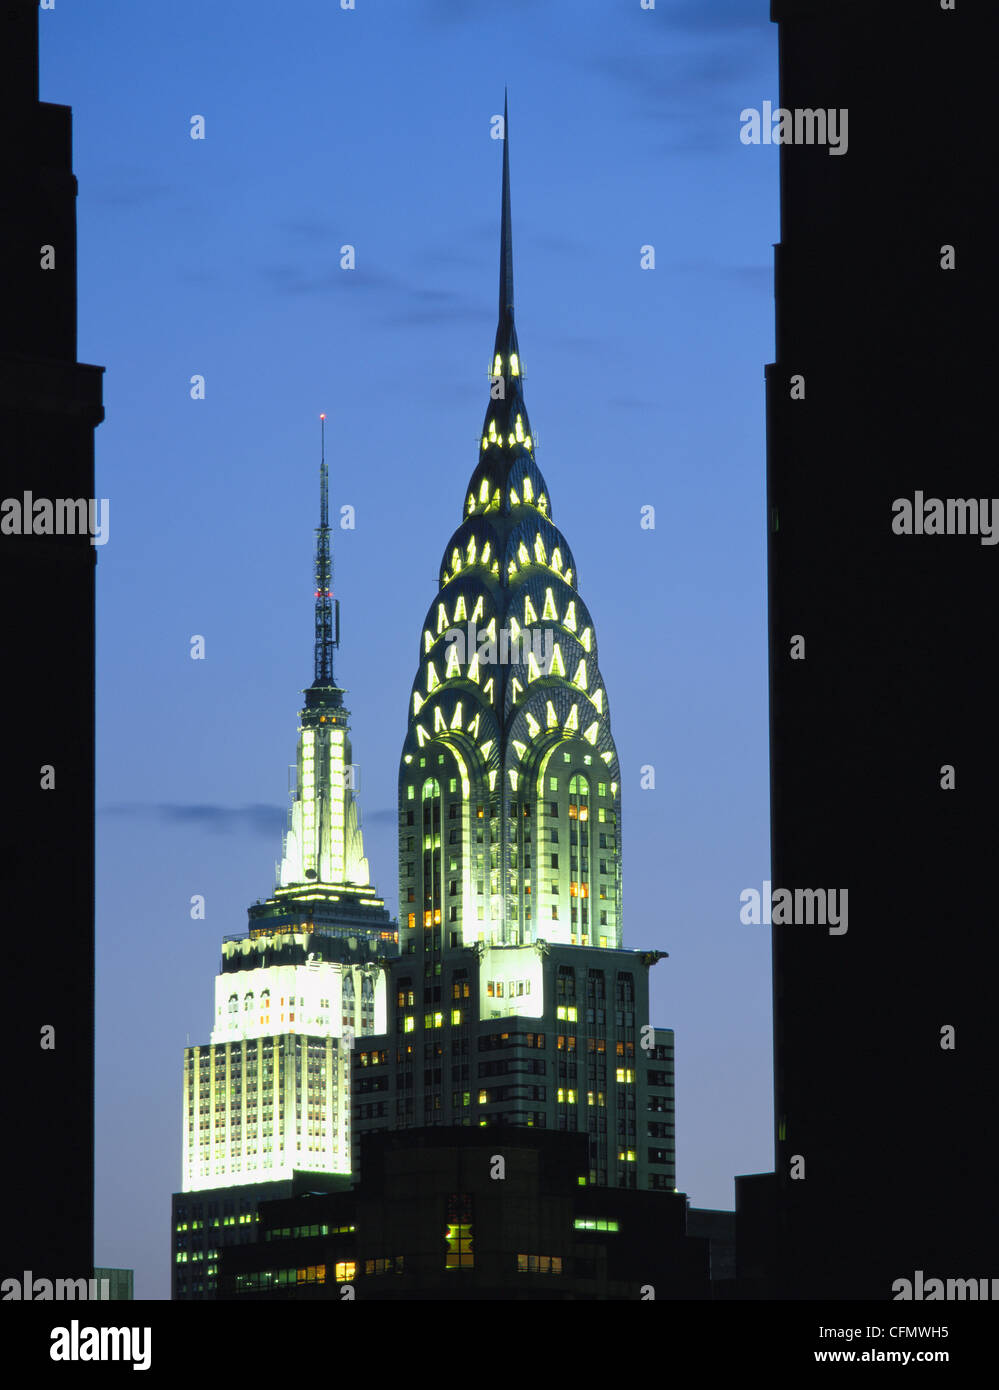 CHRYSLER & EMPIRE STATE BUILDINGS AT NIGHT, NEW YORK, USA Stock Photo